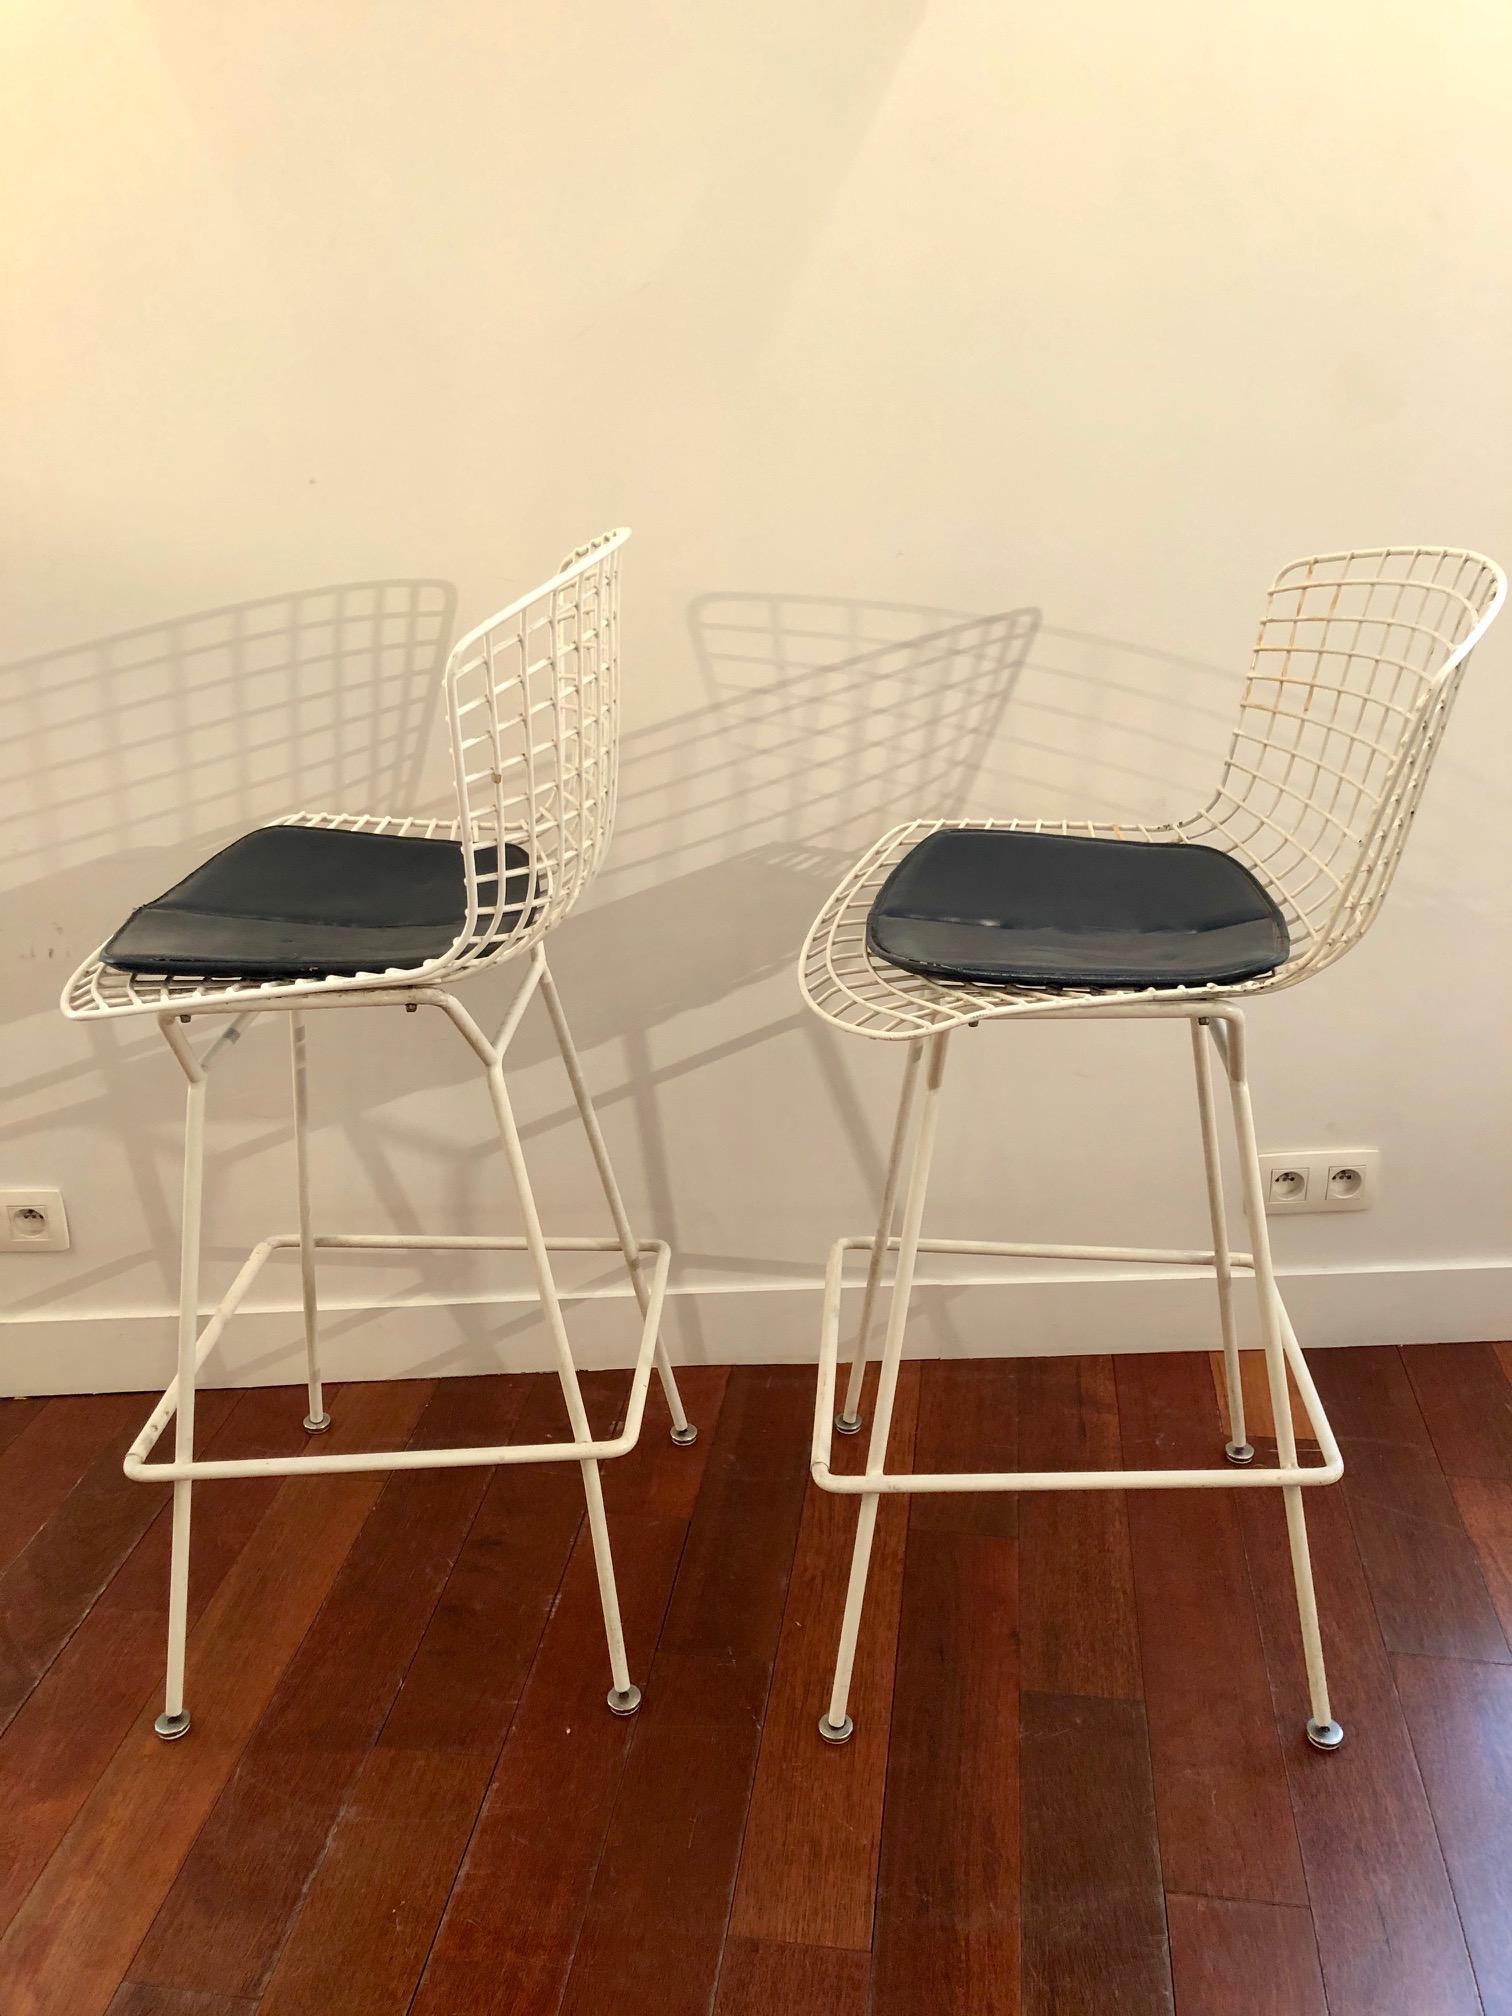 Set of 2 Harry Bertoia white barstool for Knoll International
Issues on the original chair pads (picture)

circa 1950.